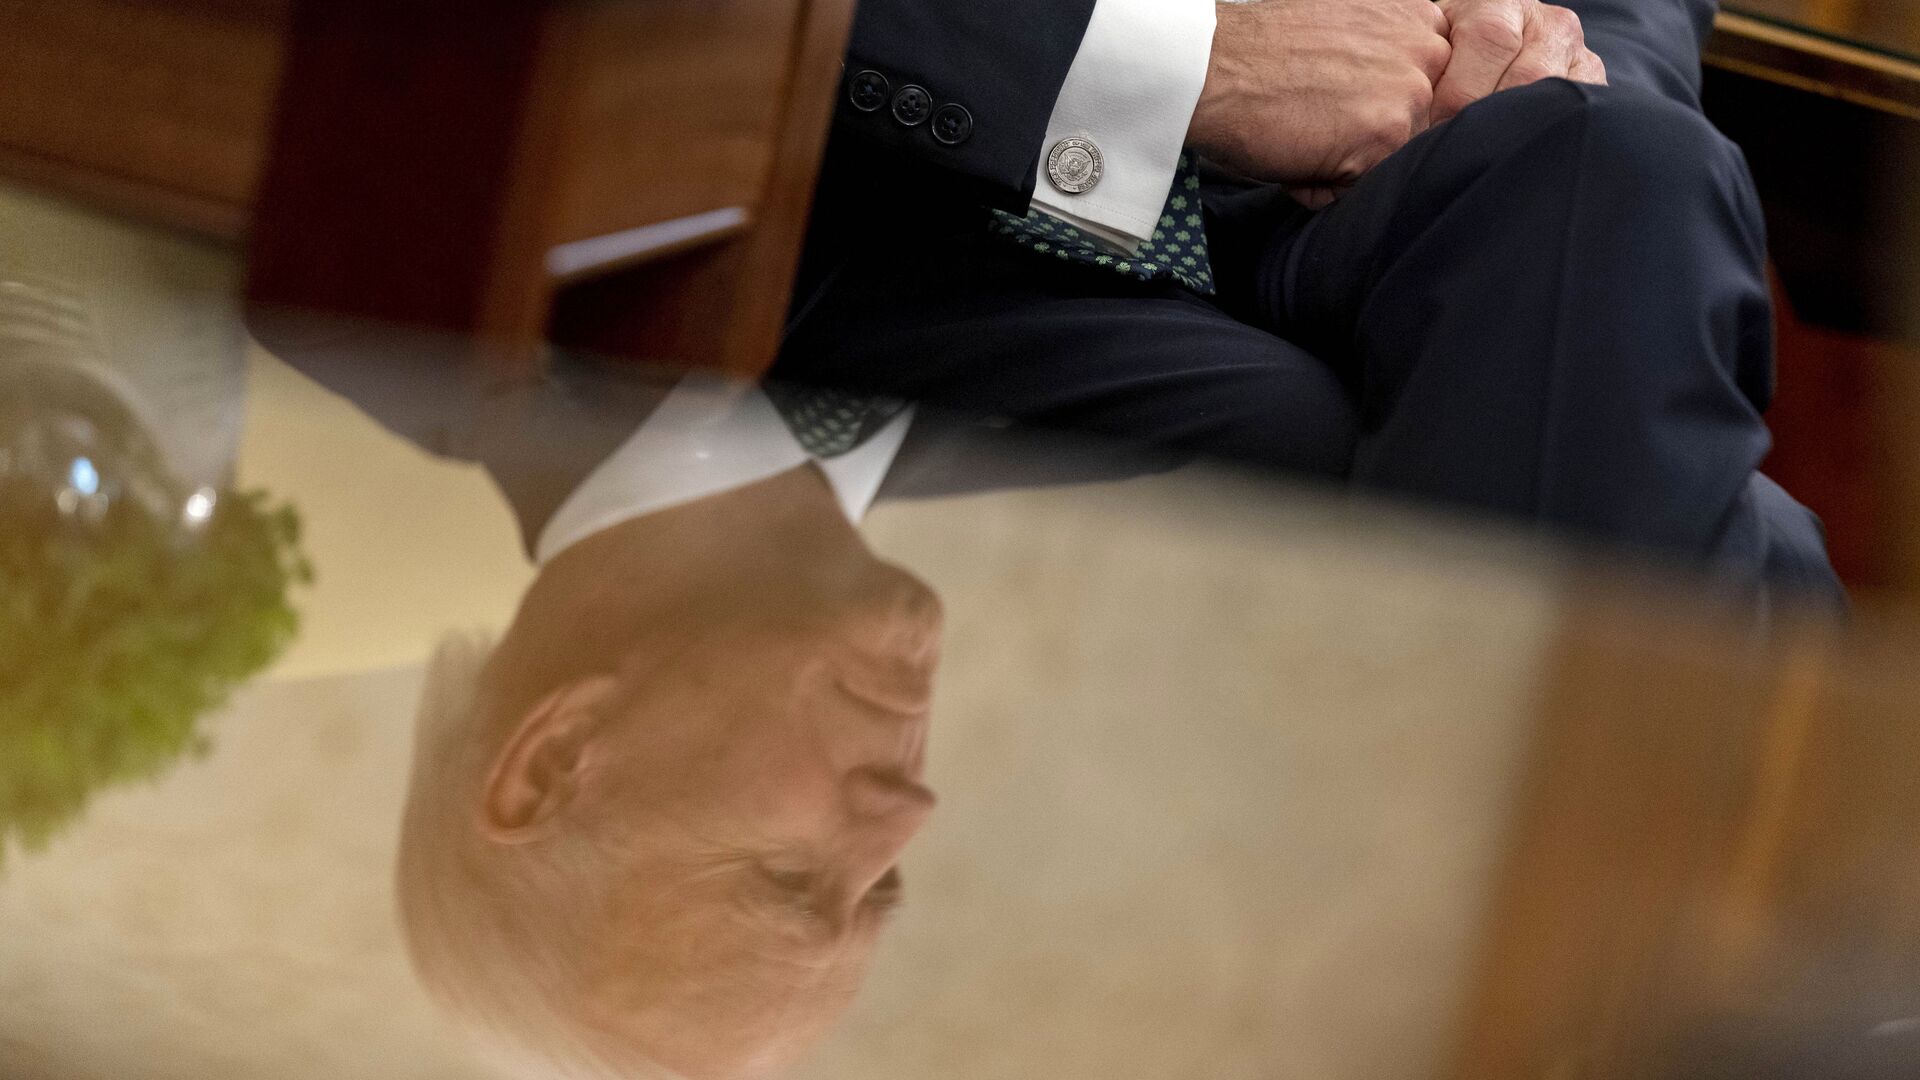 President Joe Biden, seen in reflection, sits next to a bowl of Irish shamrocks, left, as he has a virtual meeting with Ireland's Prime Minister Micheal Martin on St. Patrick's Day, in the Oval Office of the White House, Wednesday, 17 March 2021, in Washington.  - Sputnik International, 1920, 09.04.2021